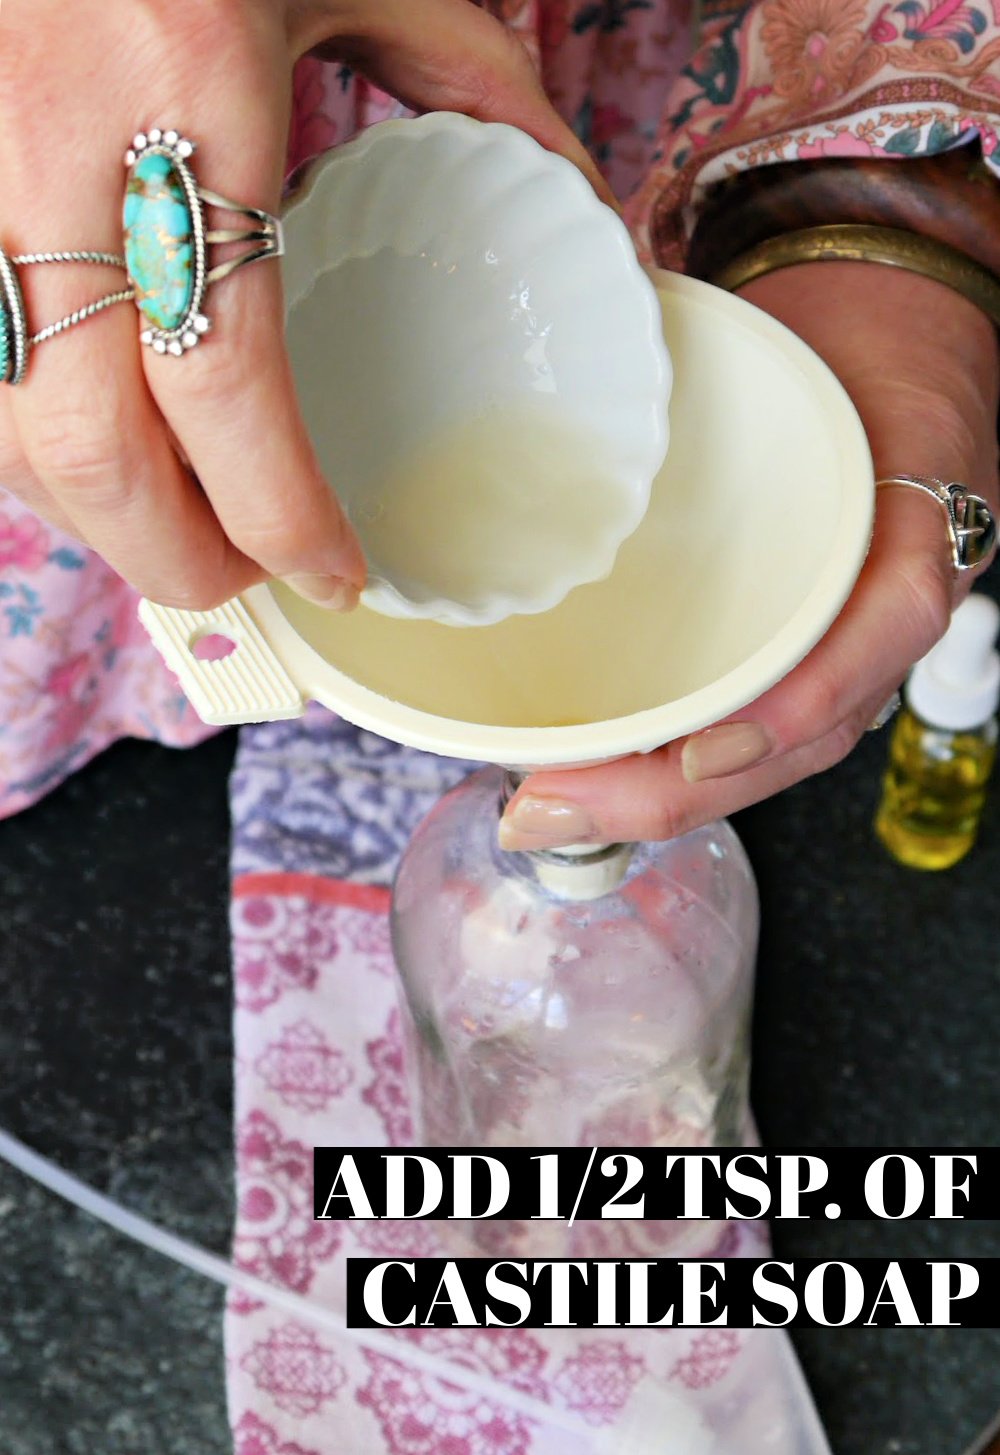 Hand pouring Castile soap into a funnel on a glass spray bottle.